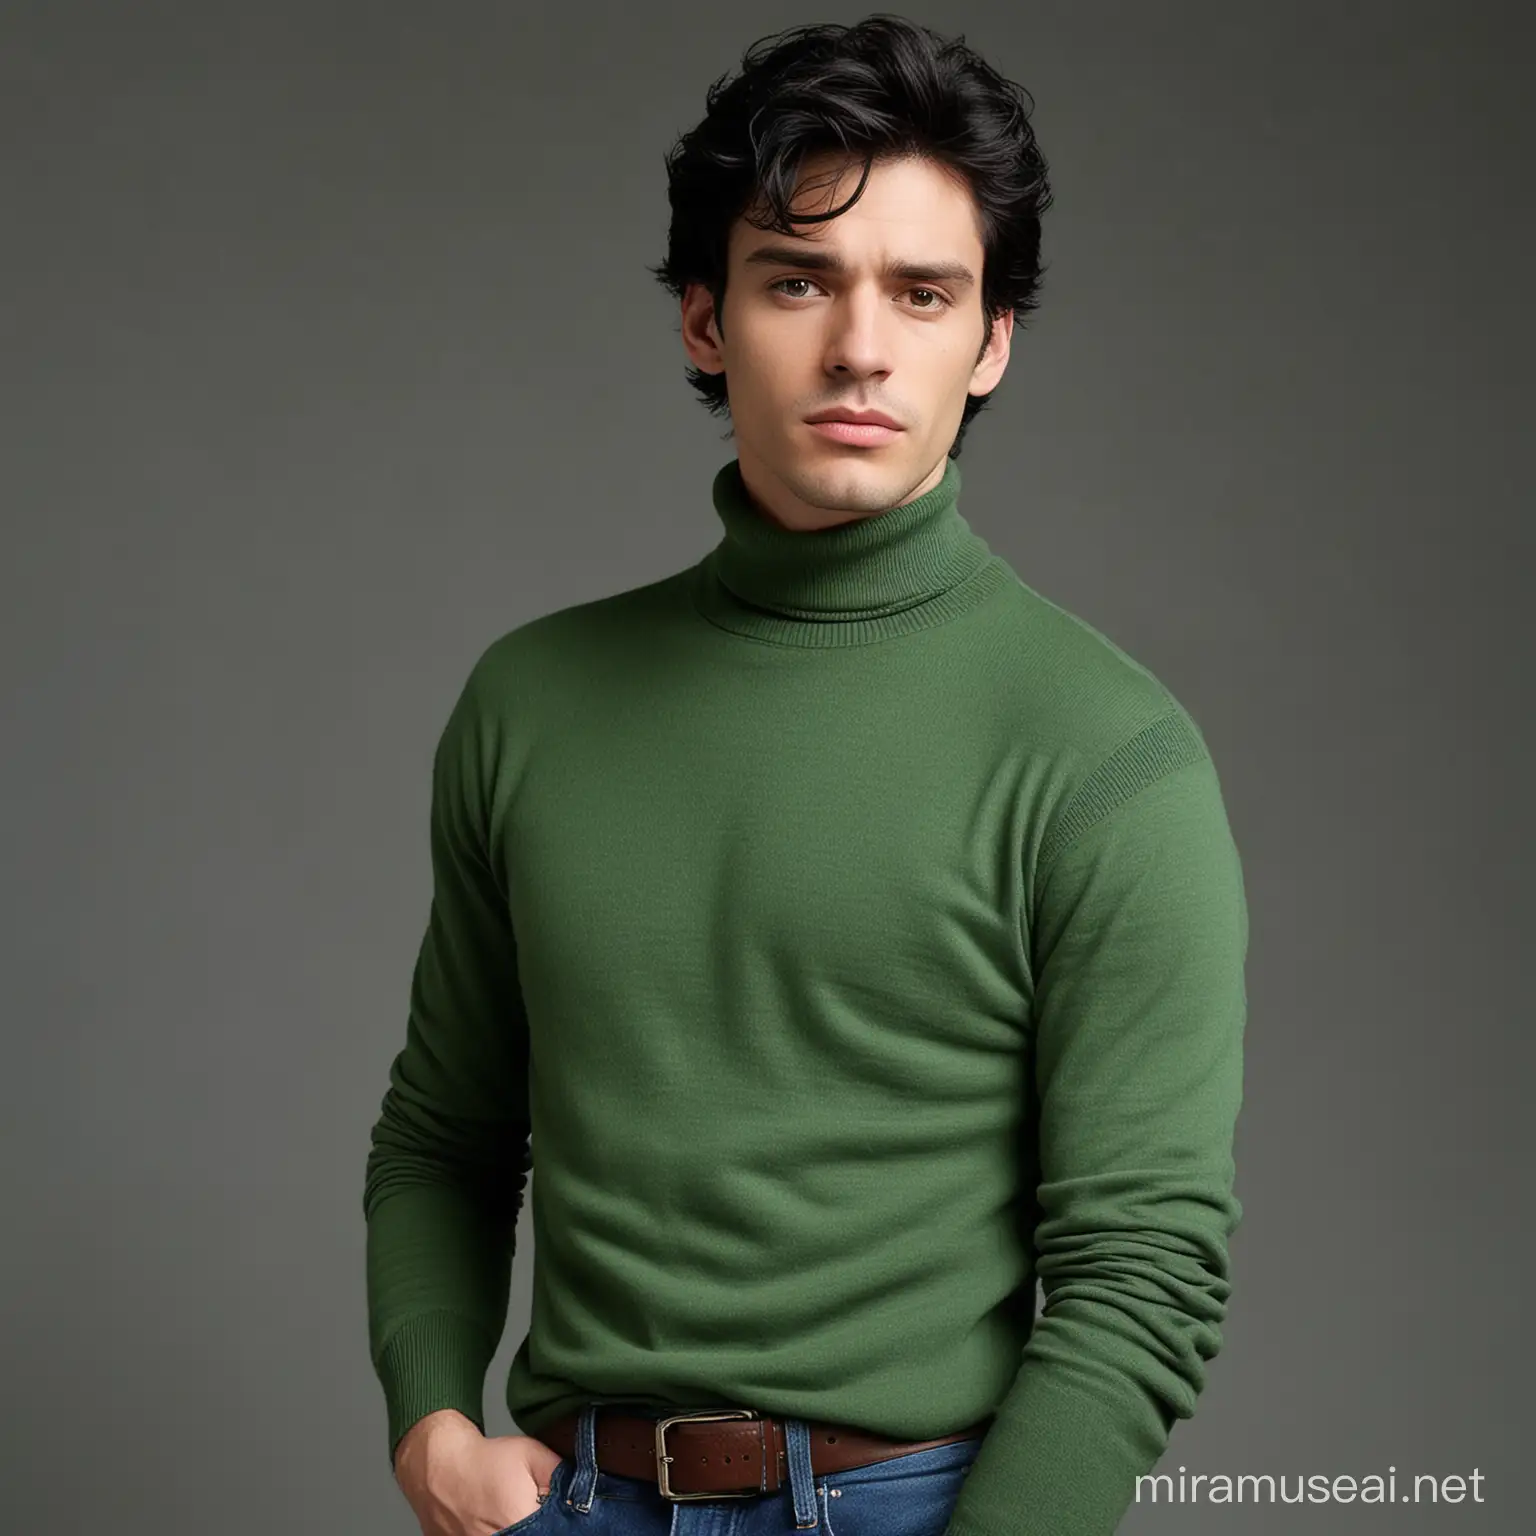 Sleepy Man in Green Turtleneck Sweater and Jeans